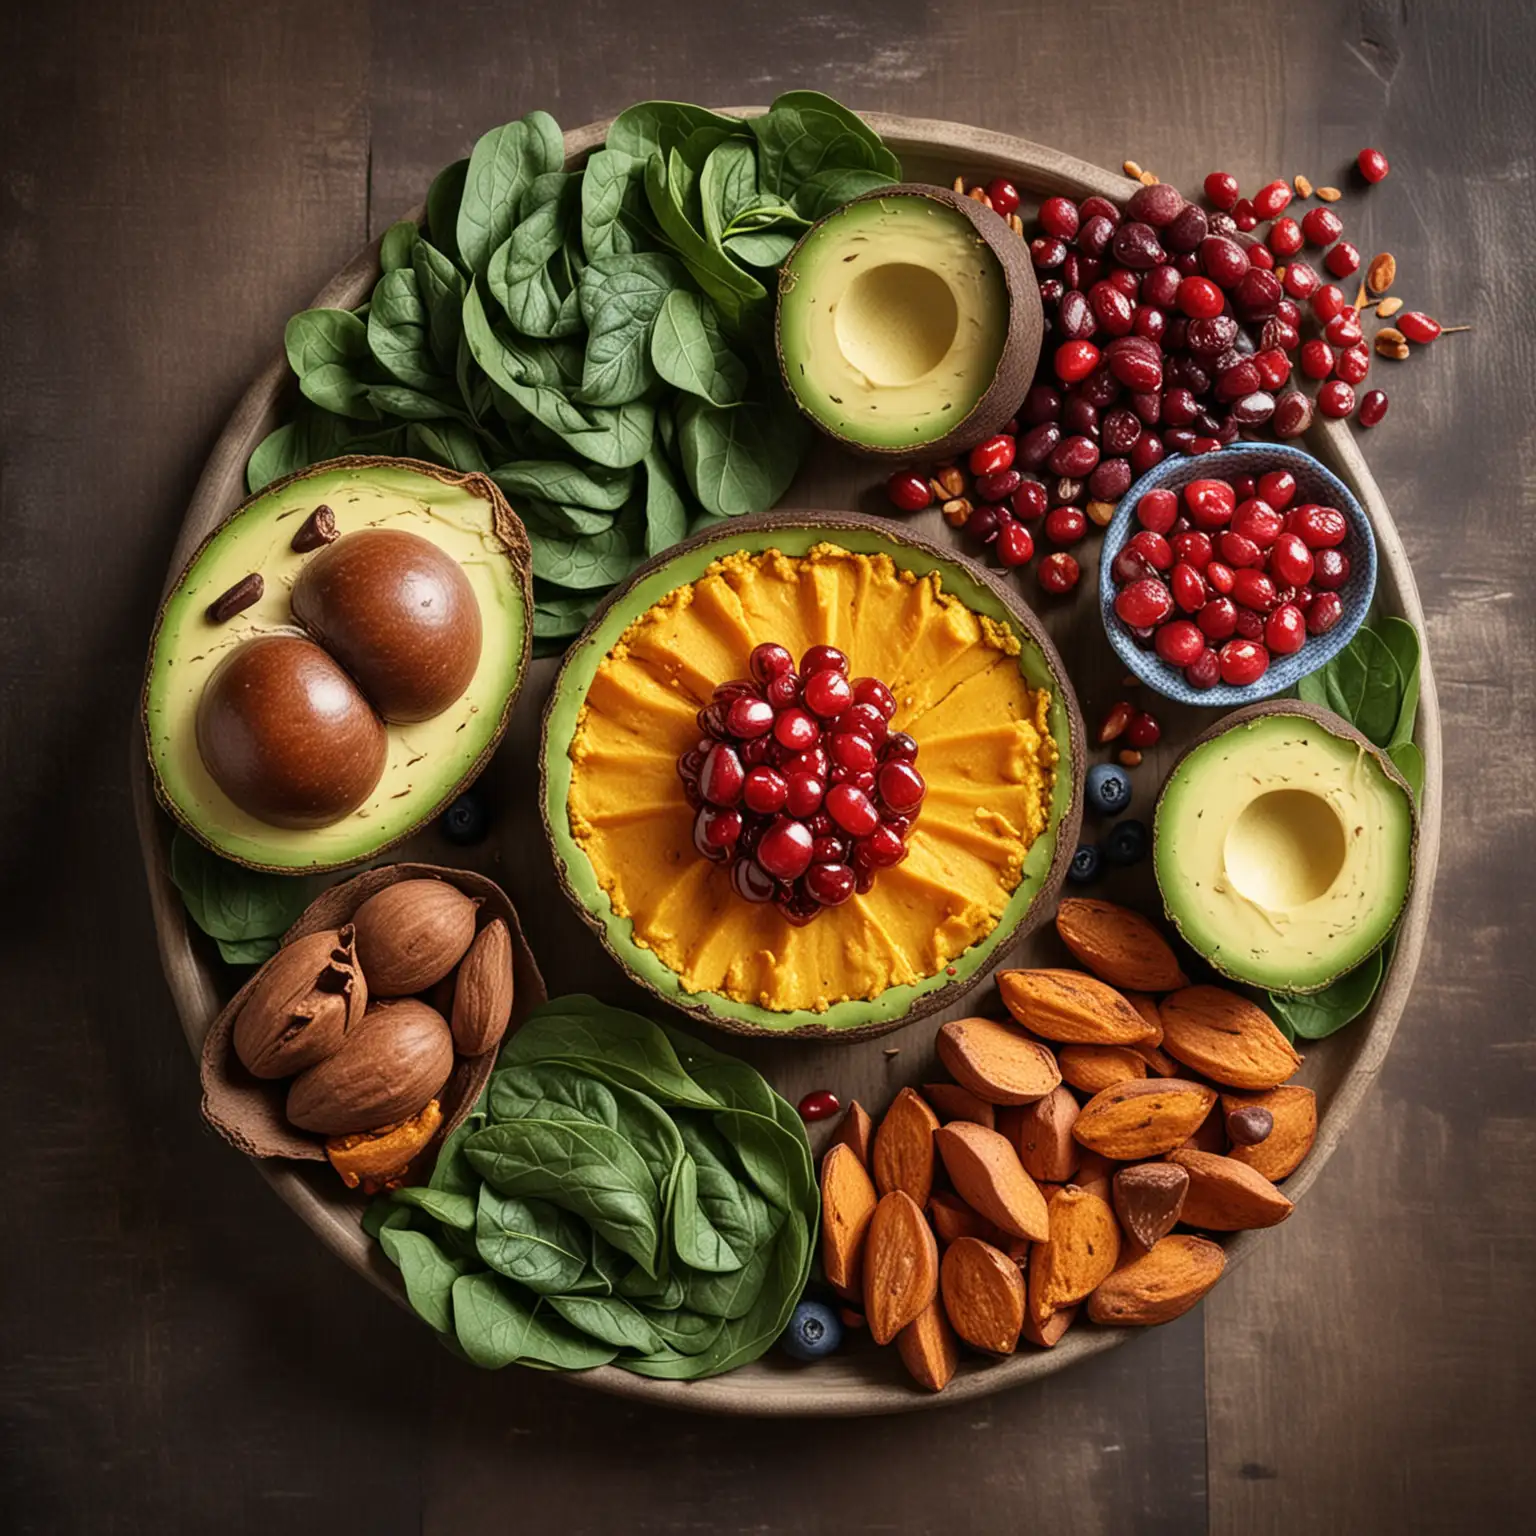 Incorporate avocados, blueberries, spinach, garlic, turmeric, almonds, sweet potatoes, pomegranates, green tea, and dark chocolate into your diet to reap their anti-aging benefits